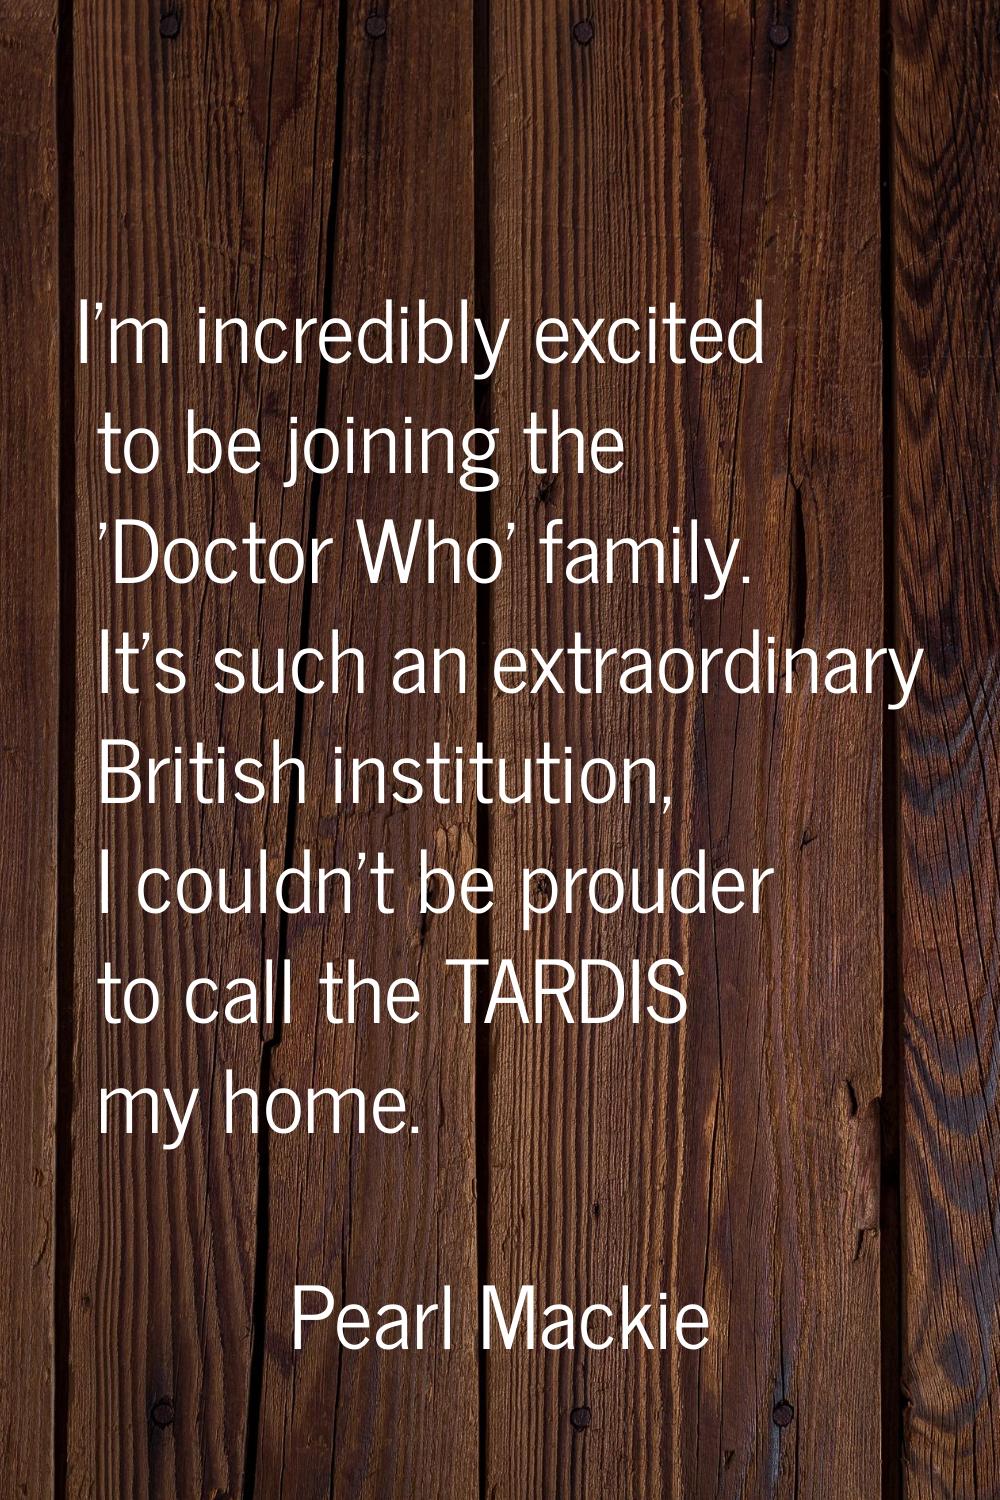 I'm incredibly excited to be joining the 'Doctor Who' family. It's such an extraordinary British in